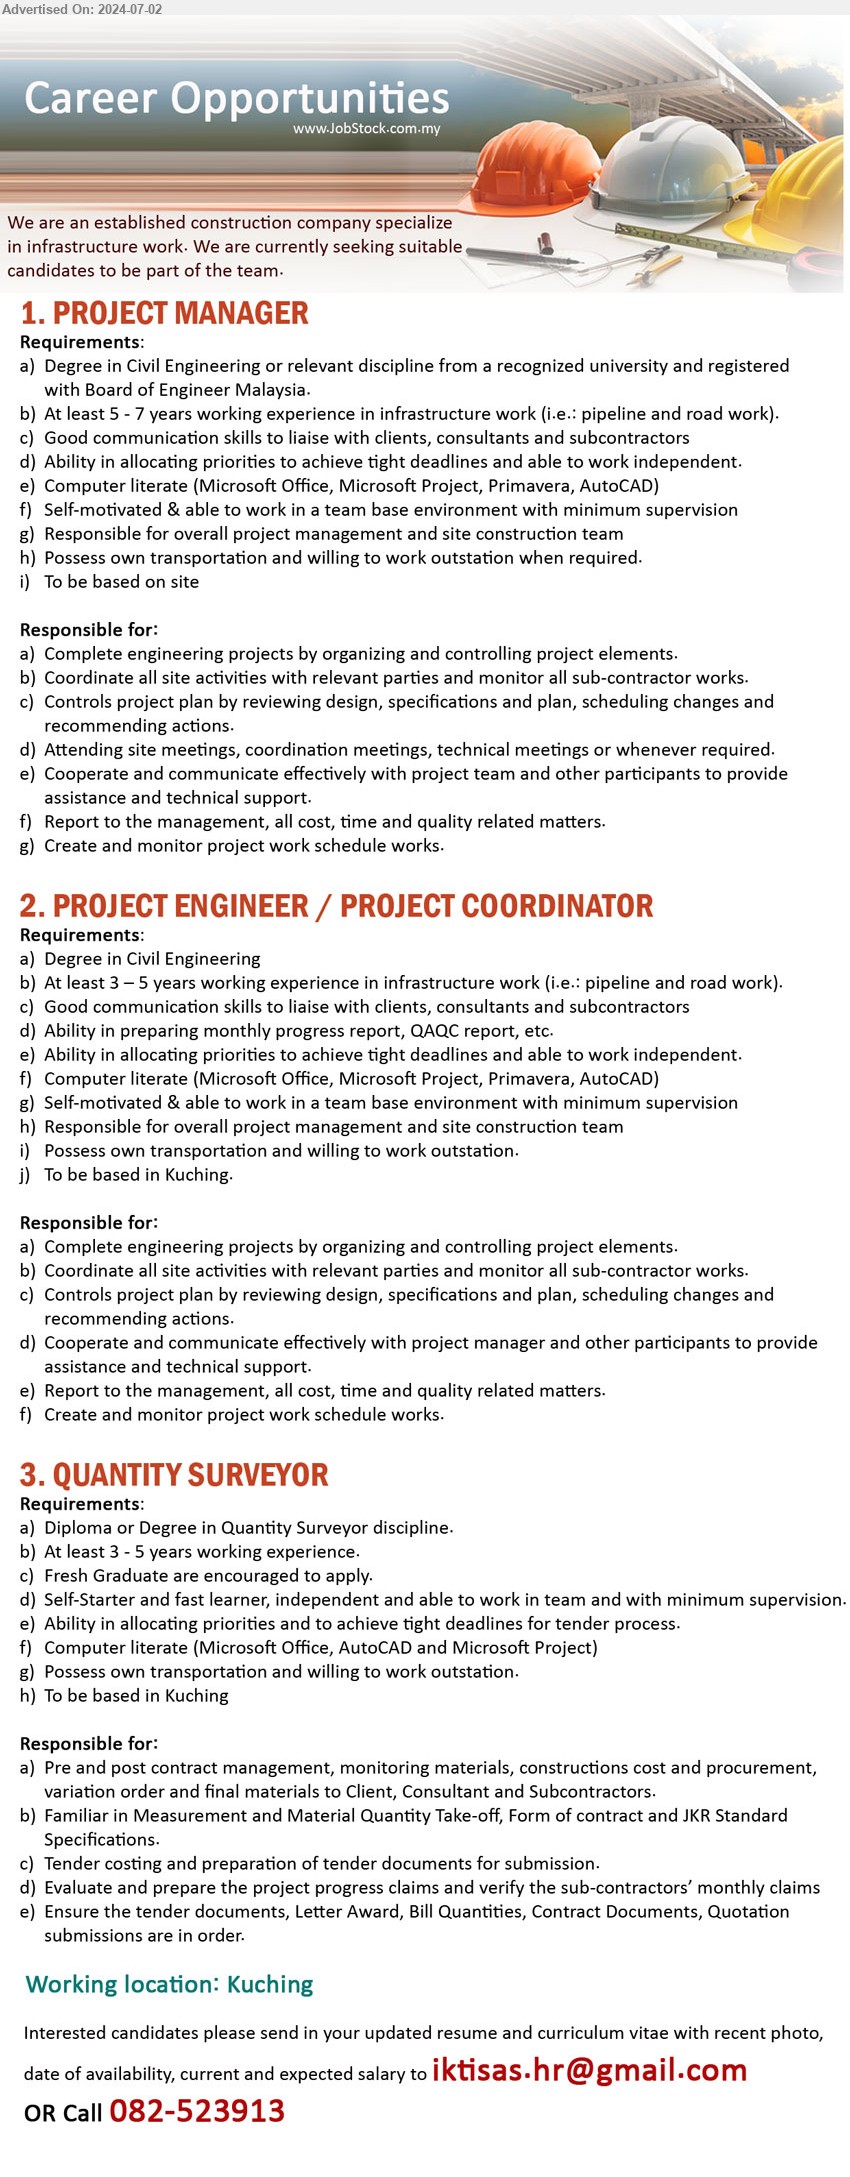 ADVERTISER (Construction Company) - 1. PROJECT MANAGER (Kuching), Degree in Civil Engineering or relevant discipline from a recognized university and registered 
with Board of Engineer Malaysia,...
2. PROJECT ENGINEER / PROJECT COORDINATOR (Kuching), Degree in Civil Engineering, At least 3 – 5 years working experience in infrastructure work ,...
3. QUANTITY SURVEYOR (Kuching), Diploma or Degree in Quantity Surveyor discipline, At least 3 - 5 years working experience.,...
Call 082-523913 / Email resume to ...